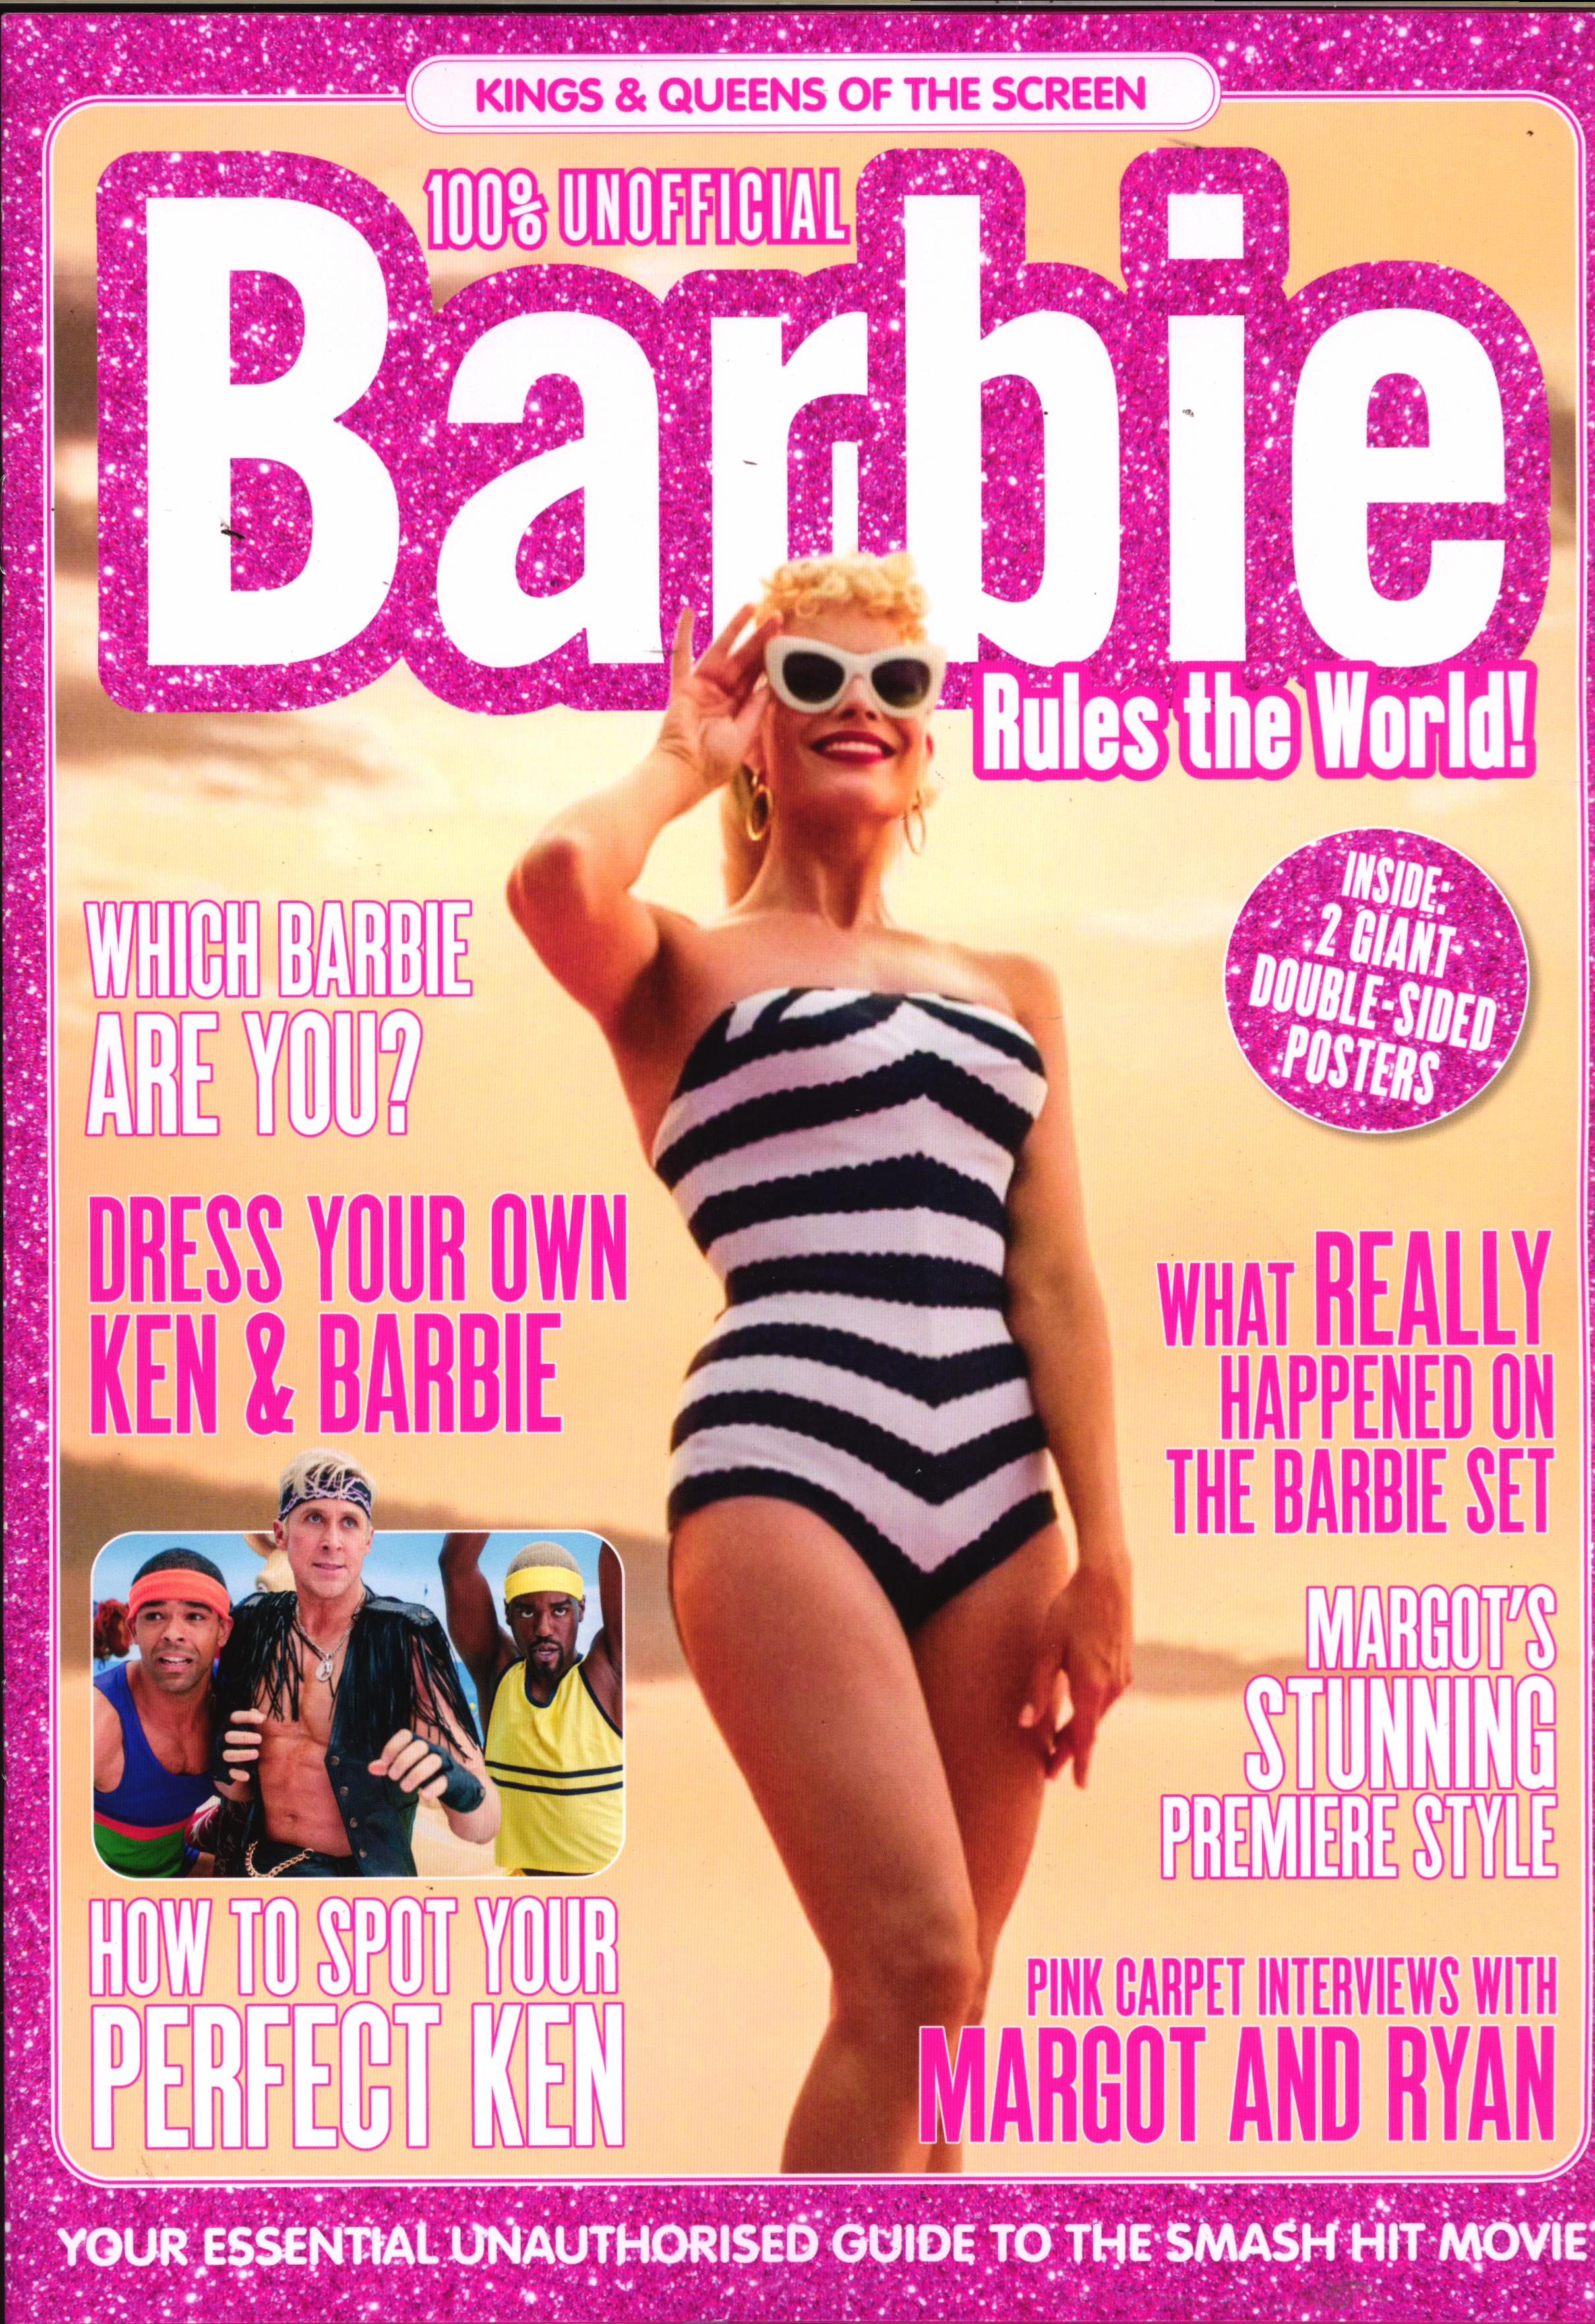 Barbie rules the world